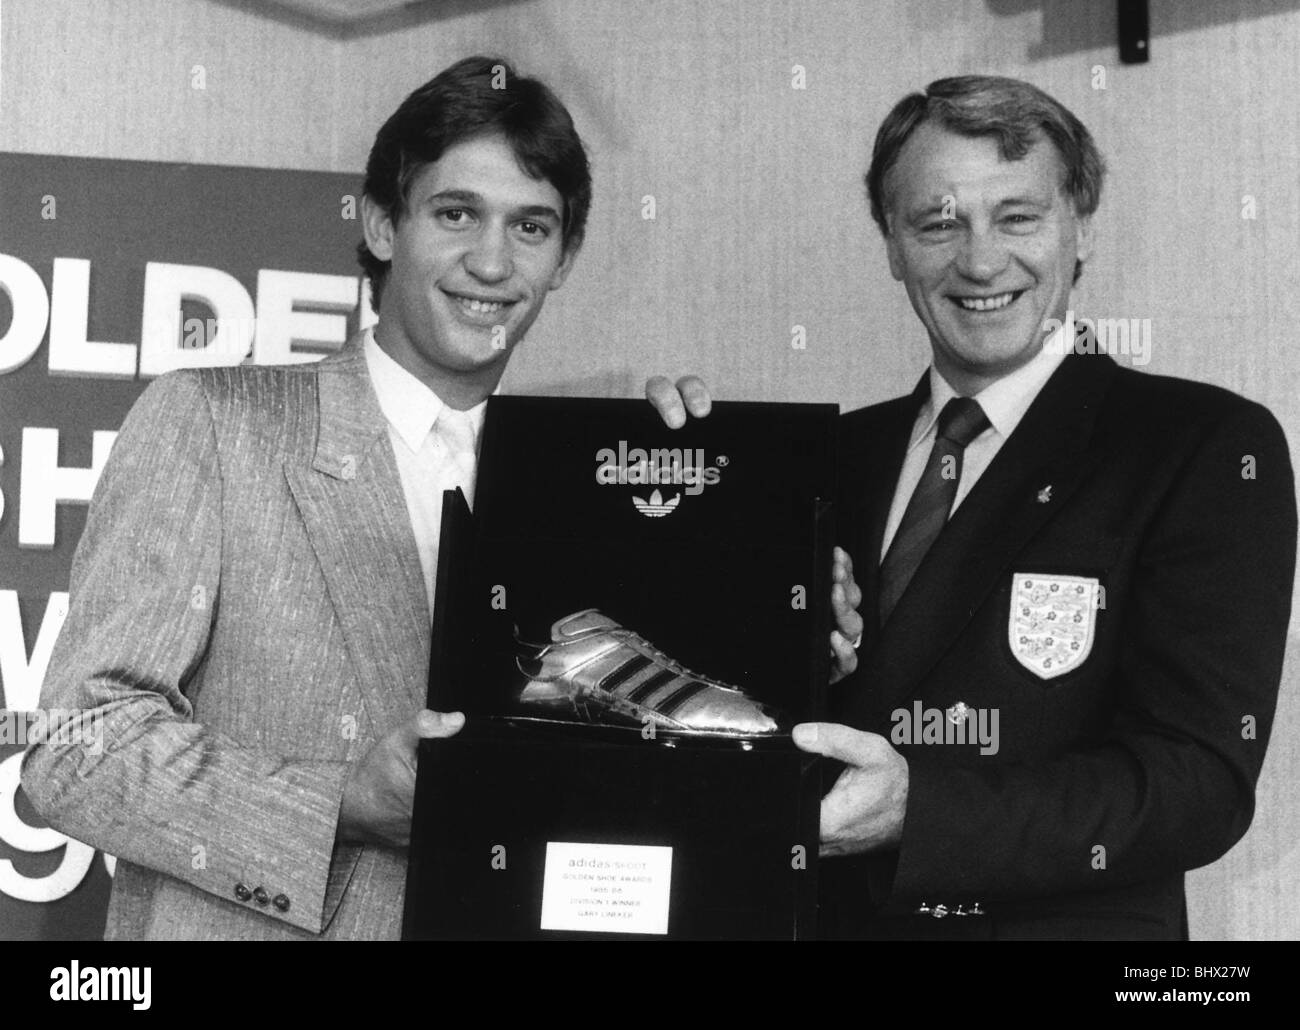 England Manager Bobby Robson presenters England player striker Gary Lineker with the Golden Boot award for top scorer in the 1986 World Cup, October 1986. Stock Photo